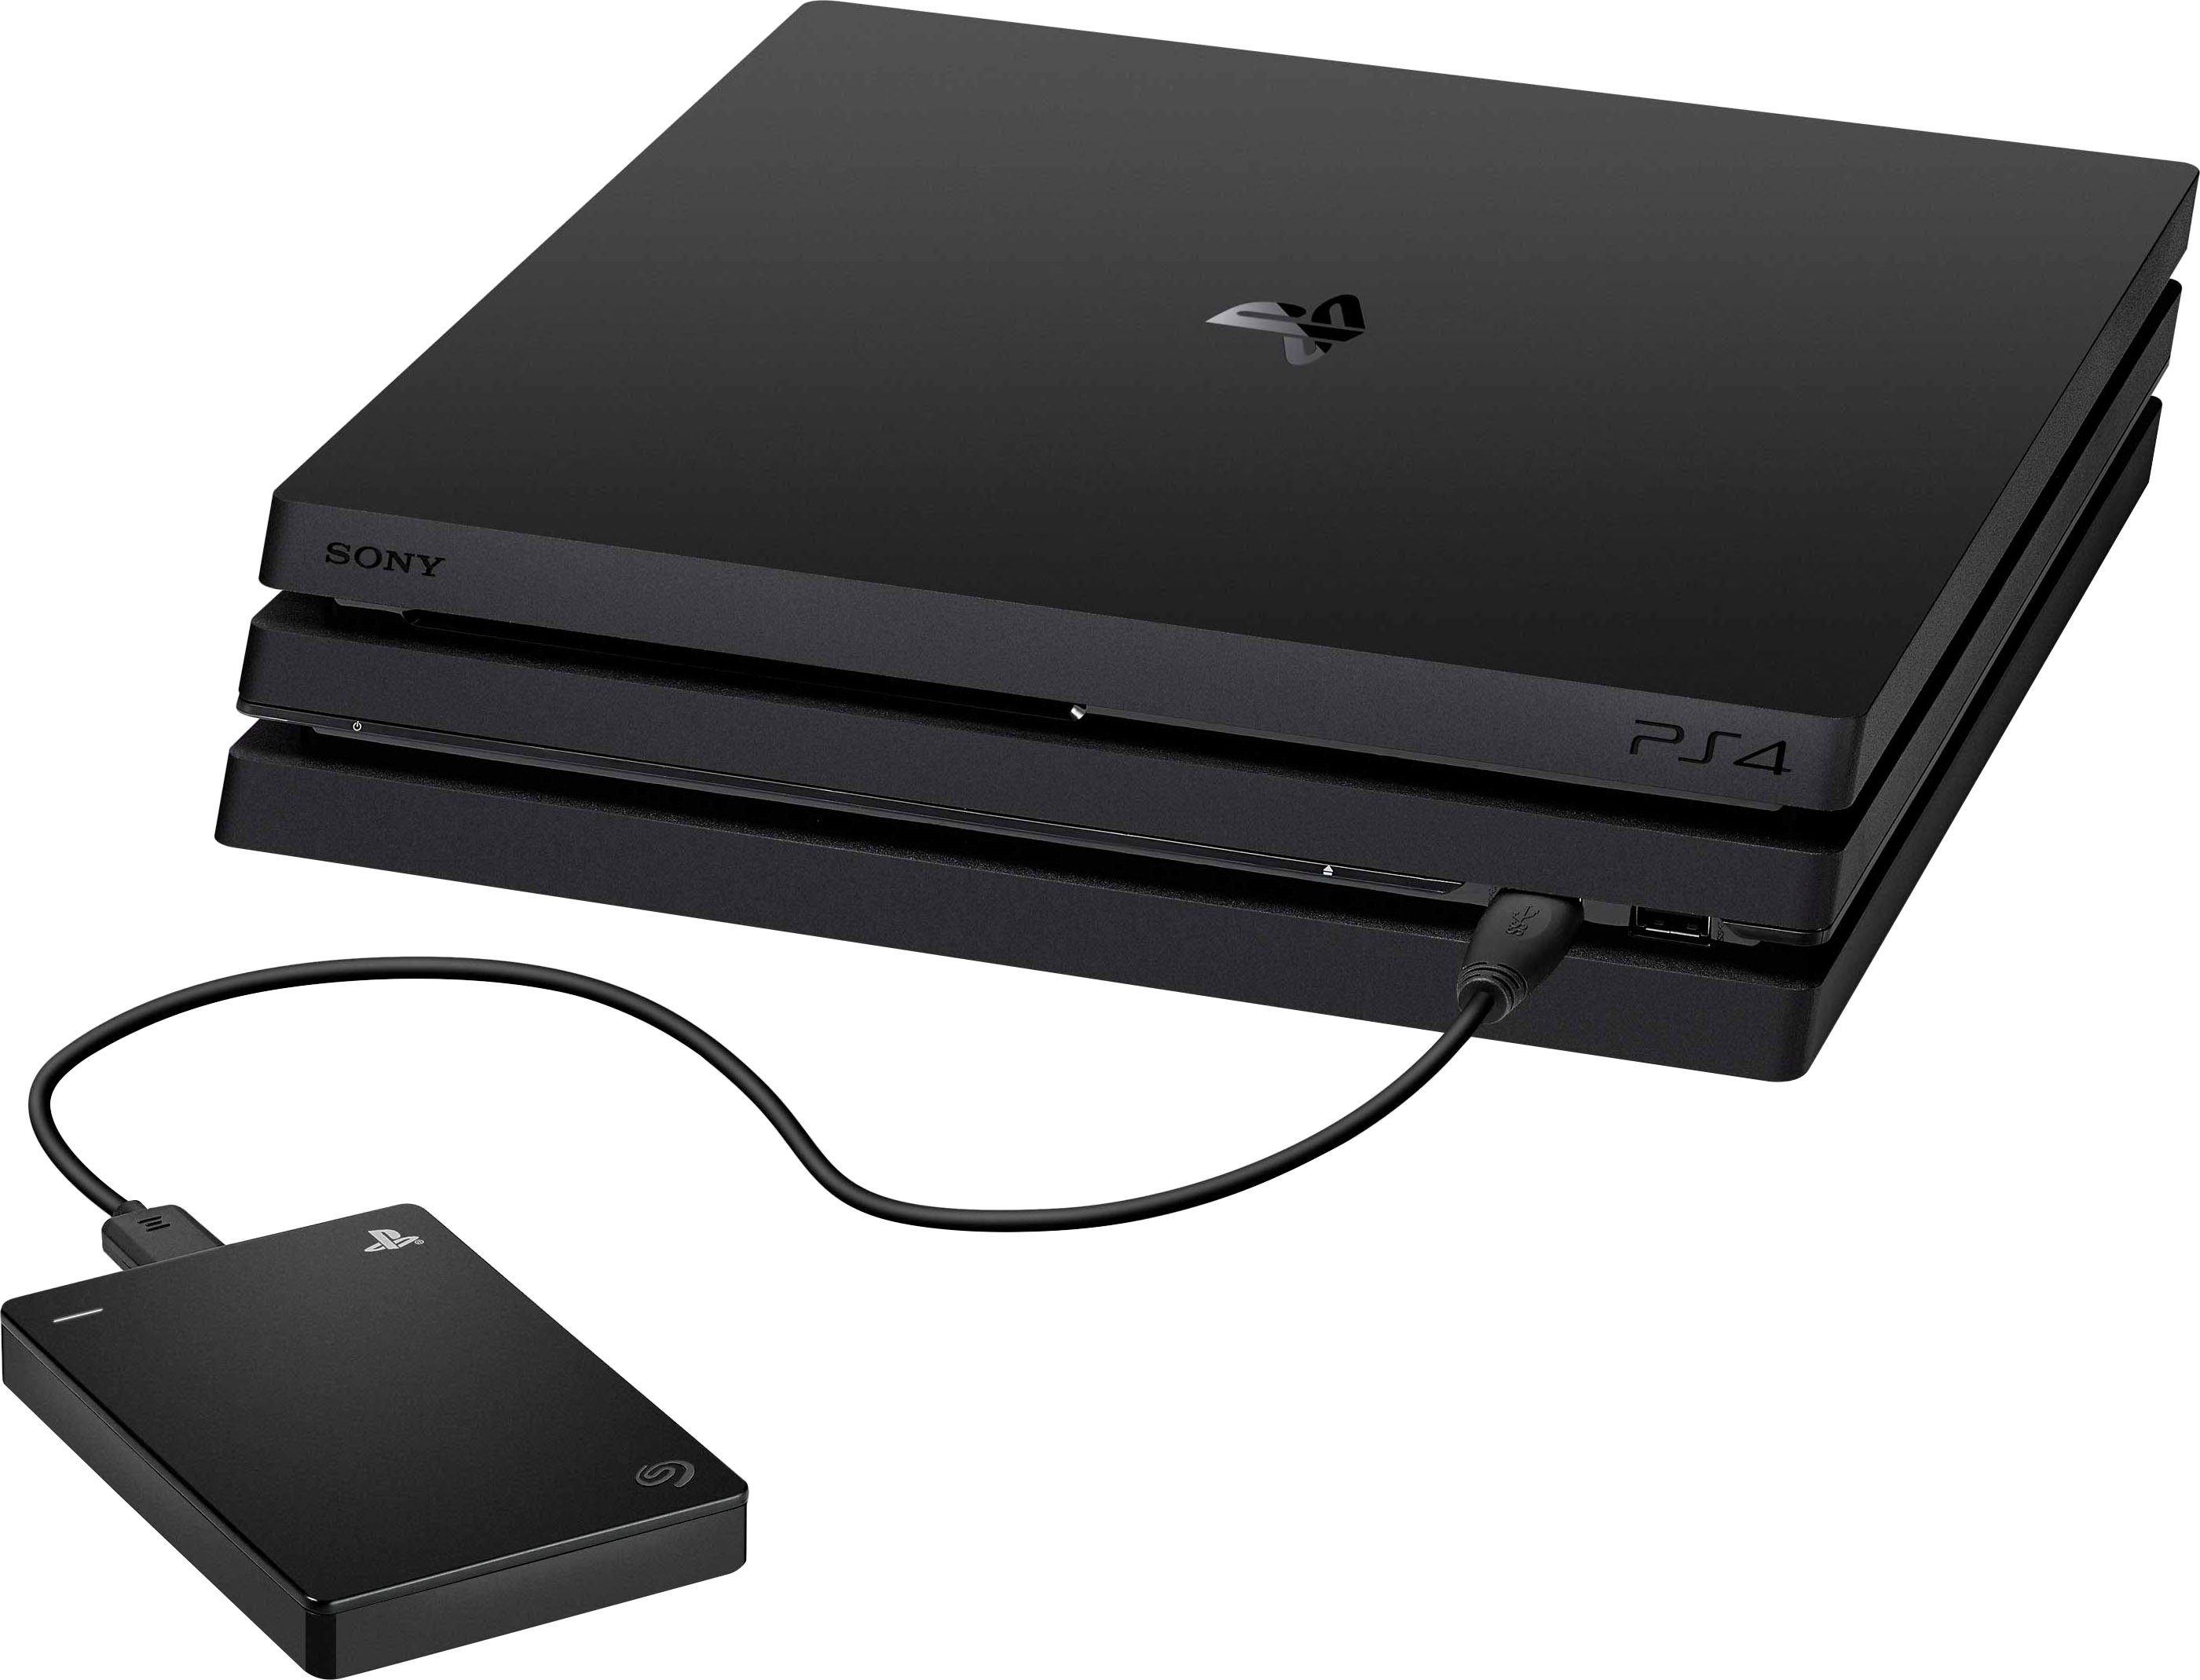 Seagate Game Drive Lesegeschwindigkeit Gbps 3.0) MB/S 480 TB) für (USB 5.0 / externe (USB Mbps 2.0) PS4/PS5 (4 4TB HDD-Festplatte